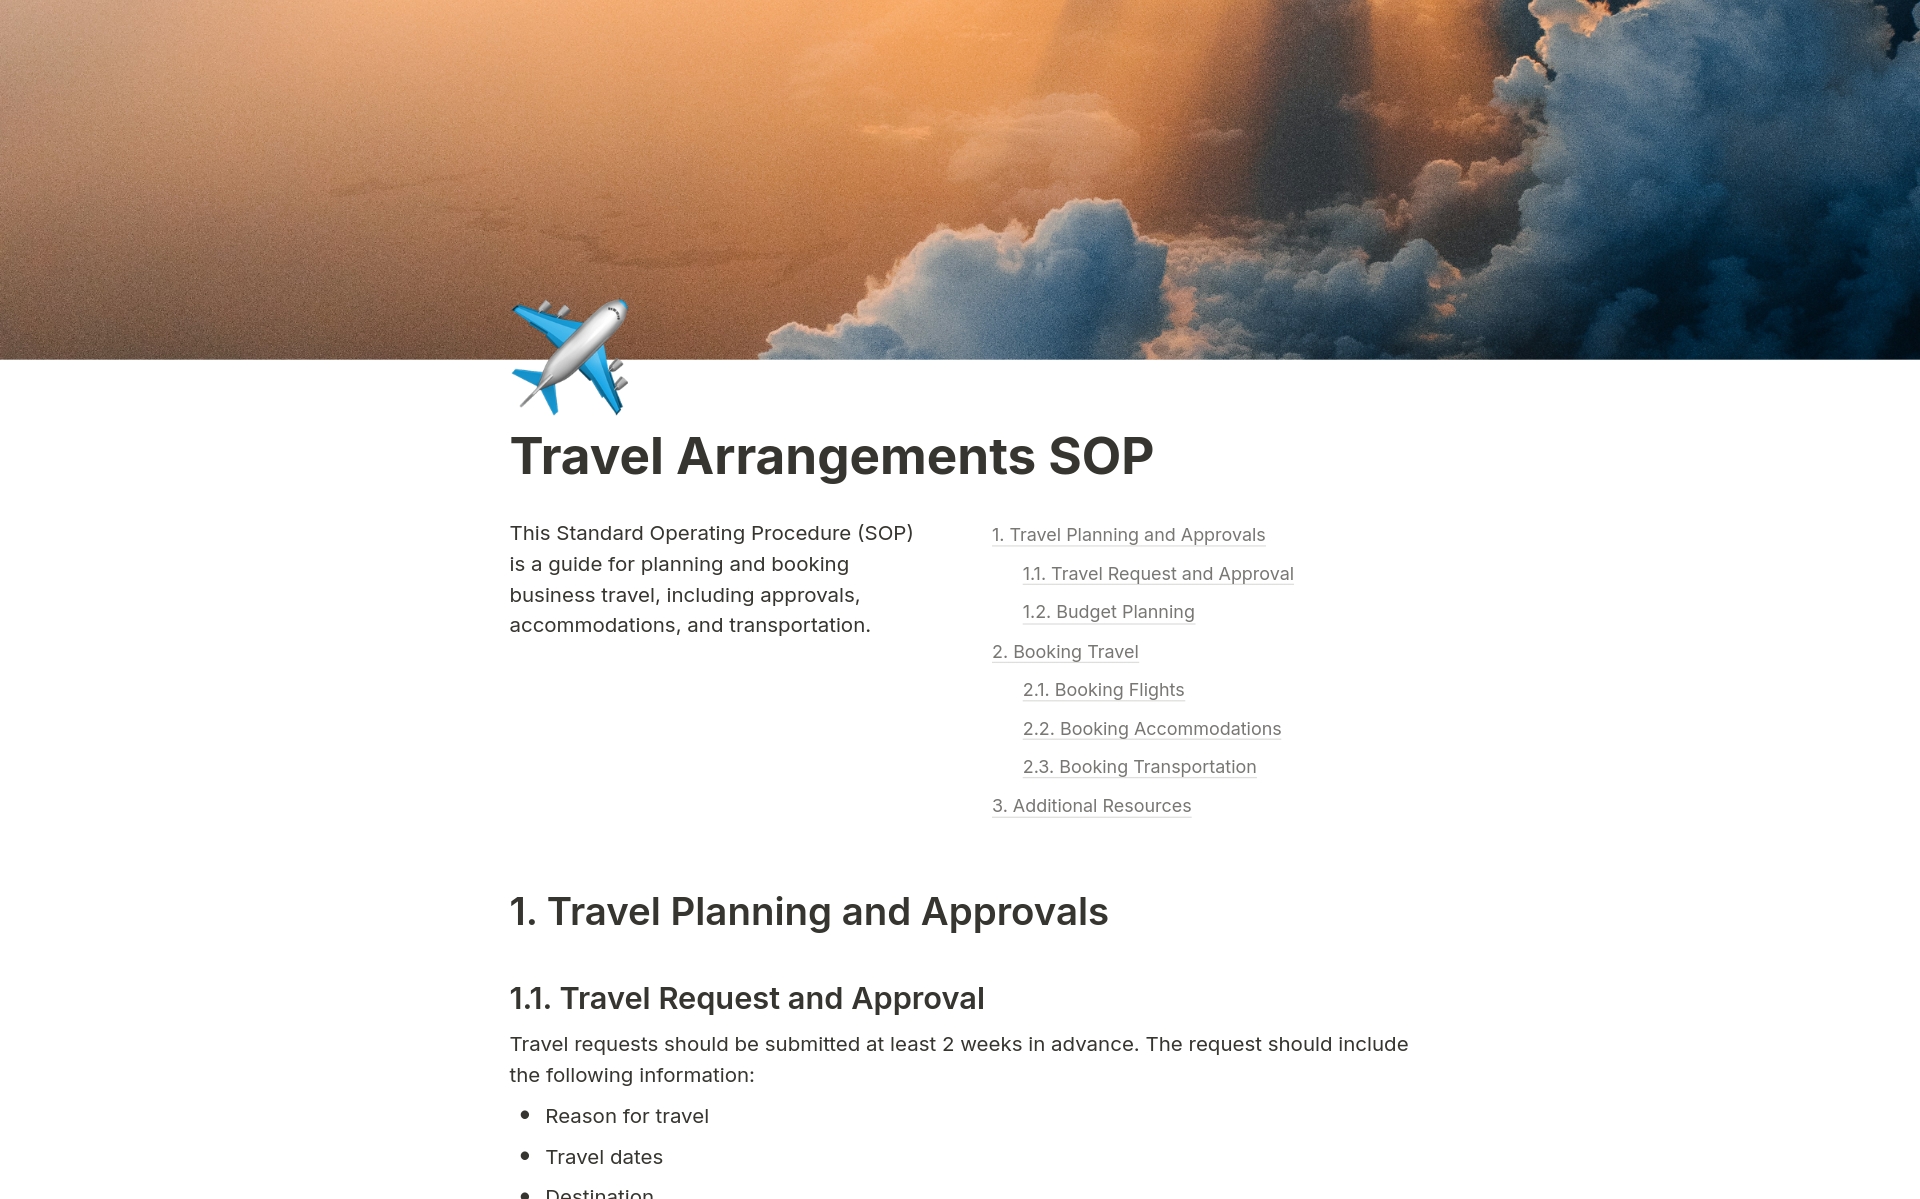 Simplify business travel planning with this SOP template for booking flights, accommodations, and managing approvals efficiently.